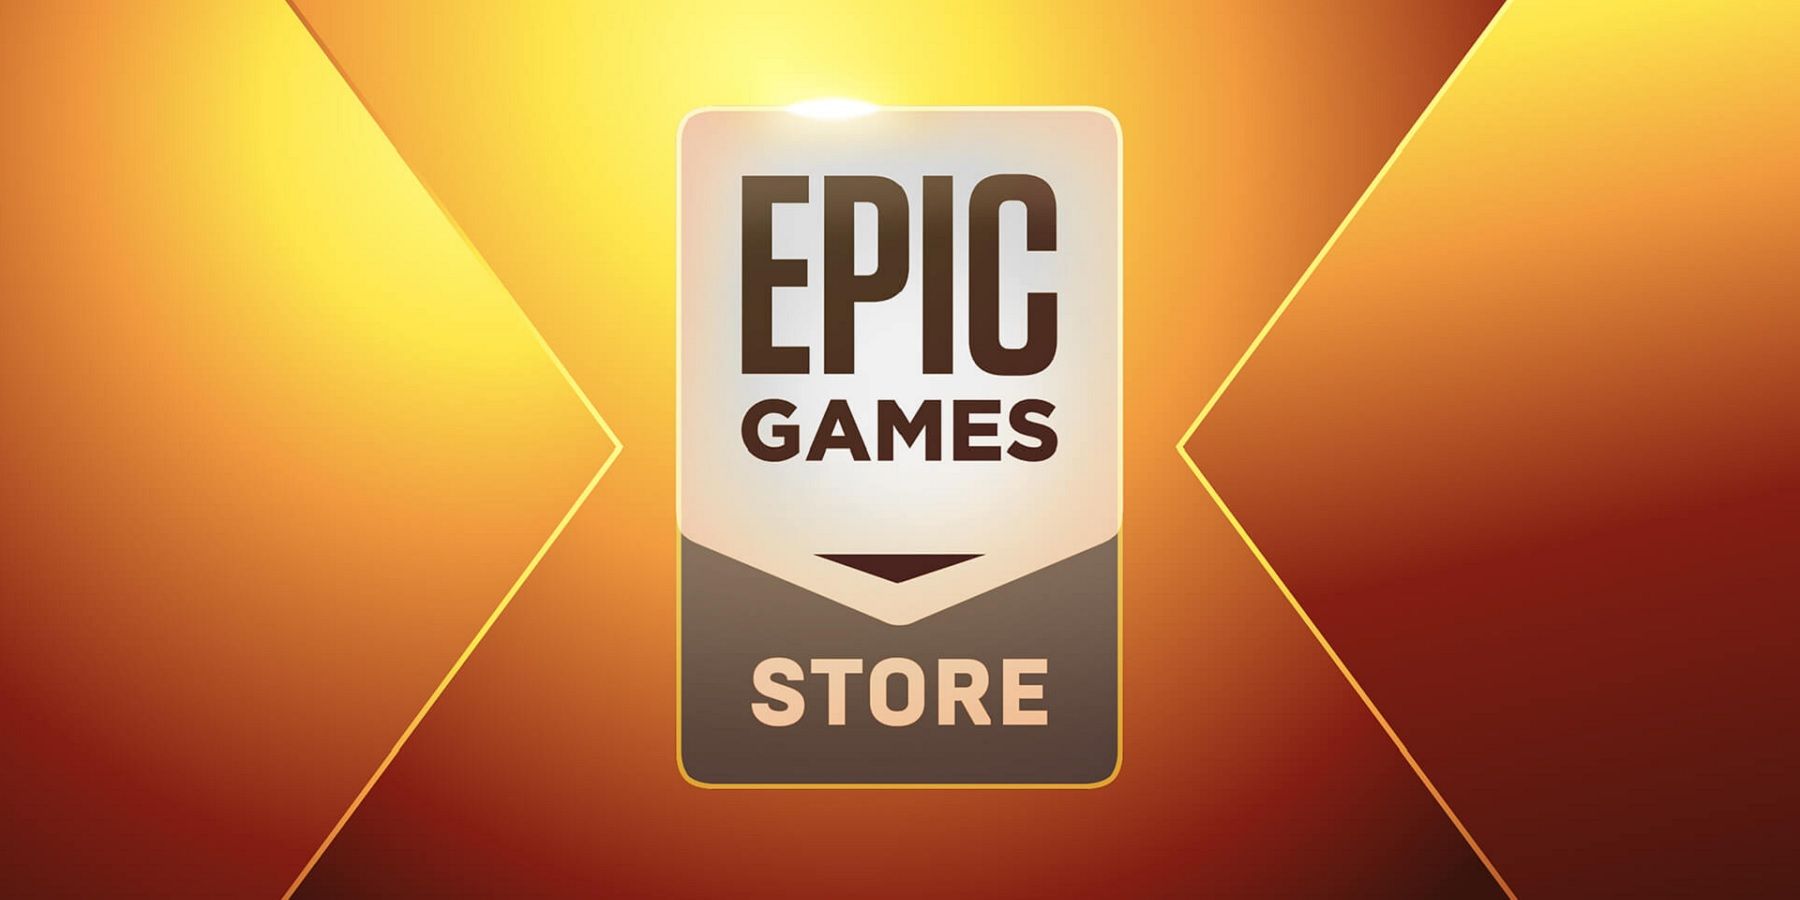 Today's free game from the Epic Store is an excuse to stay inside on  Christmas Eve